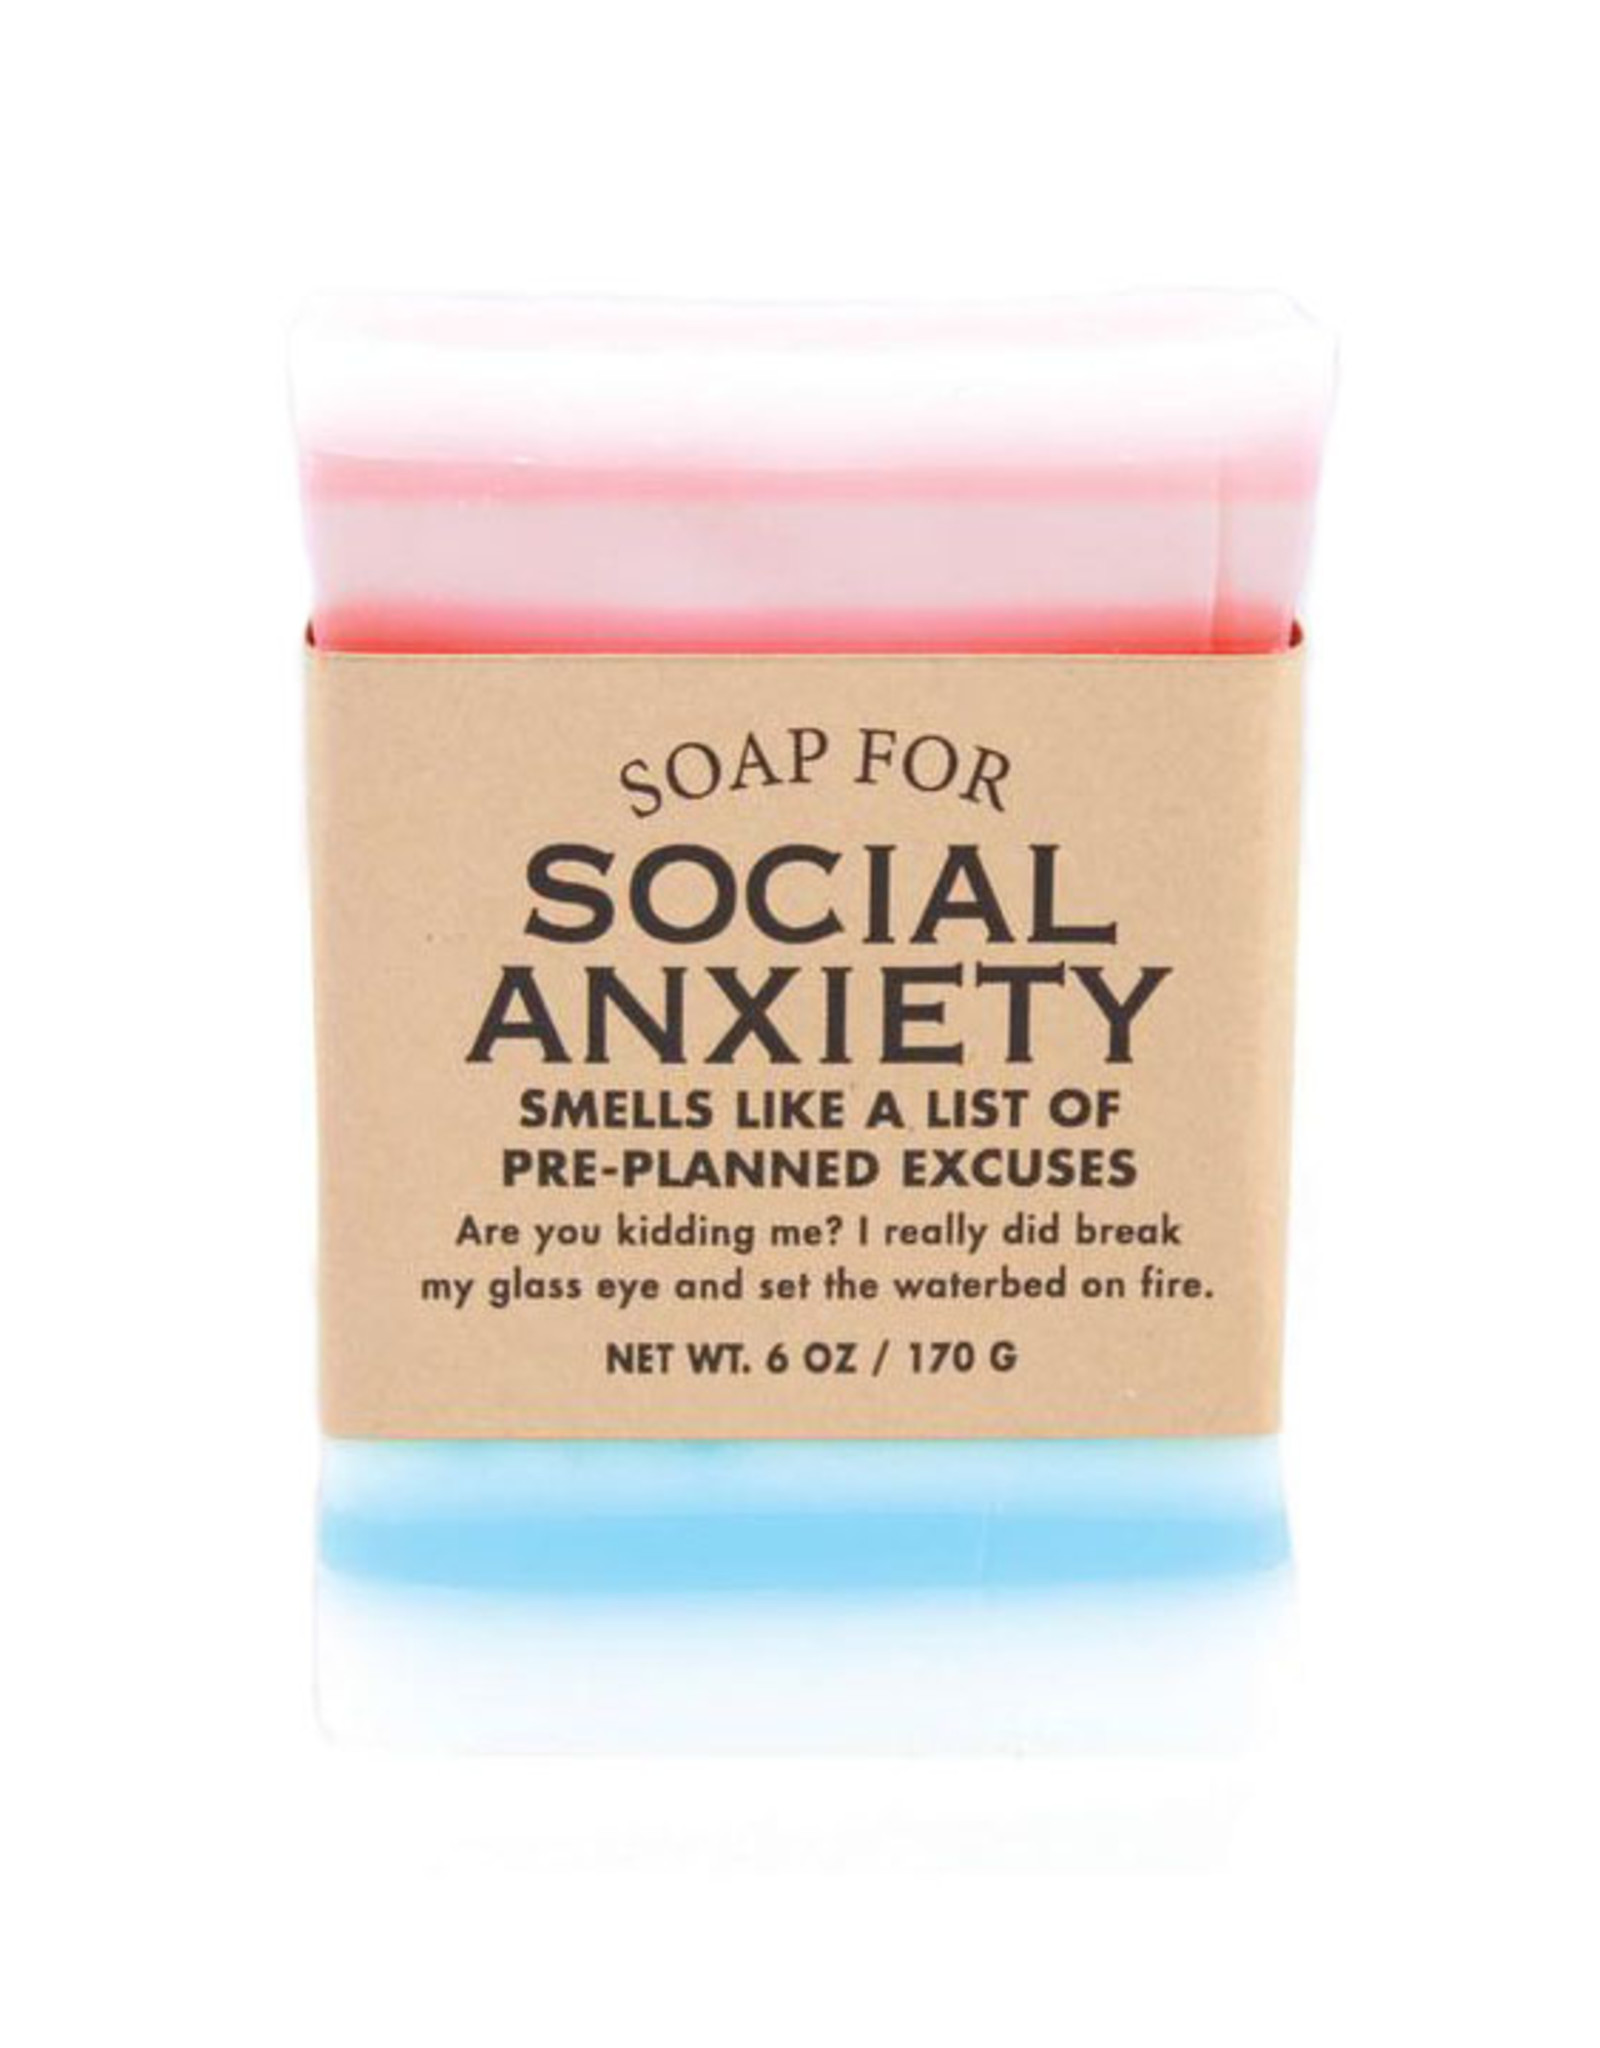 A Soap for Social Anxiety